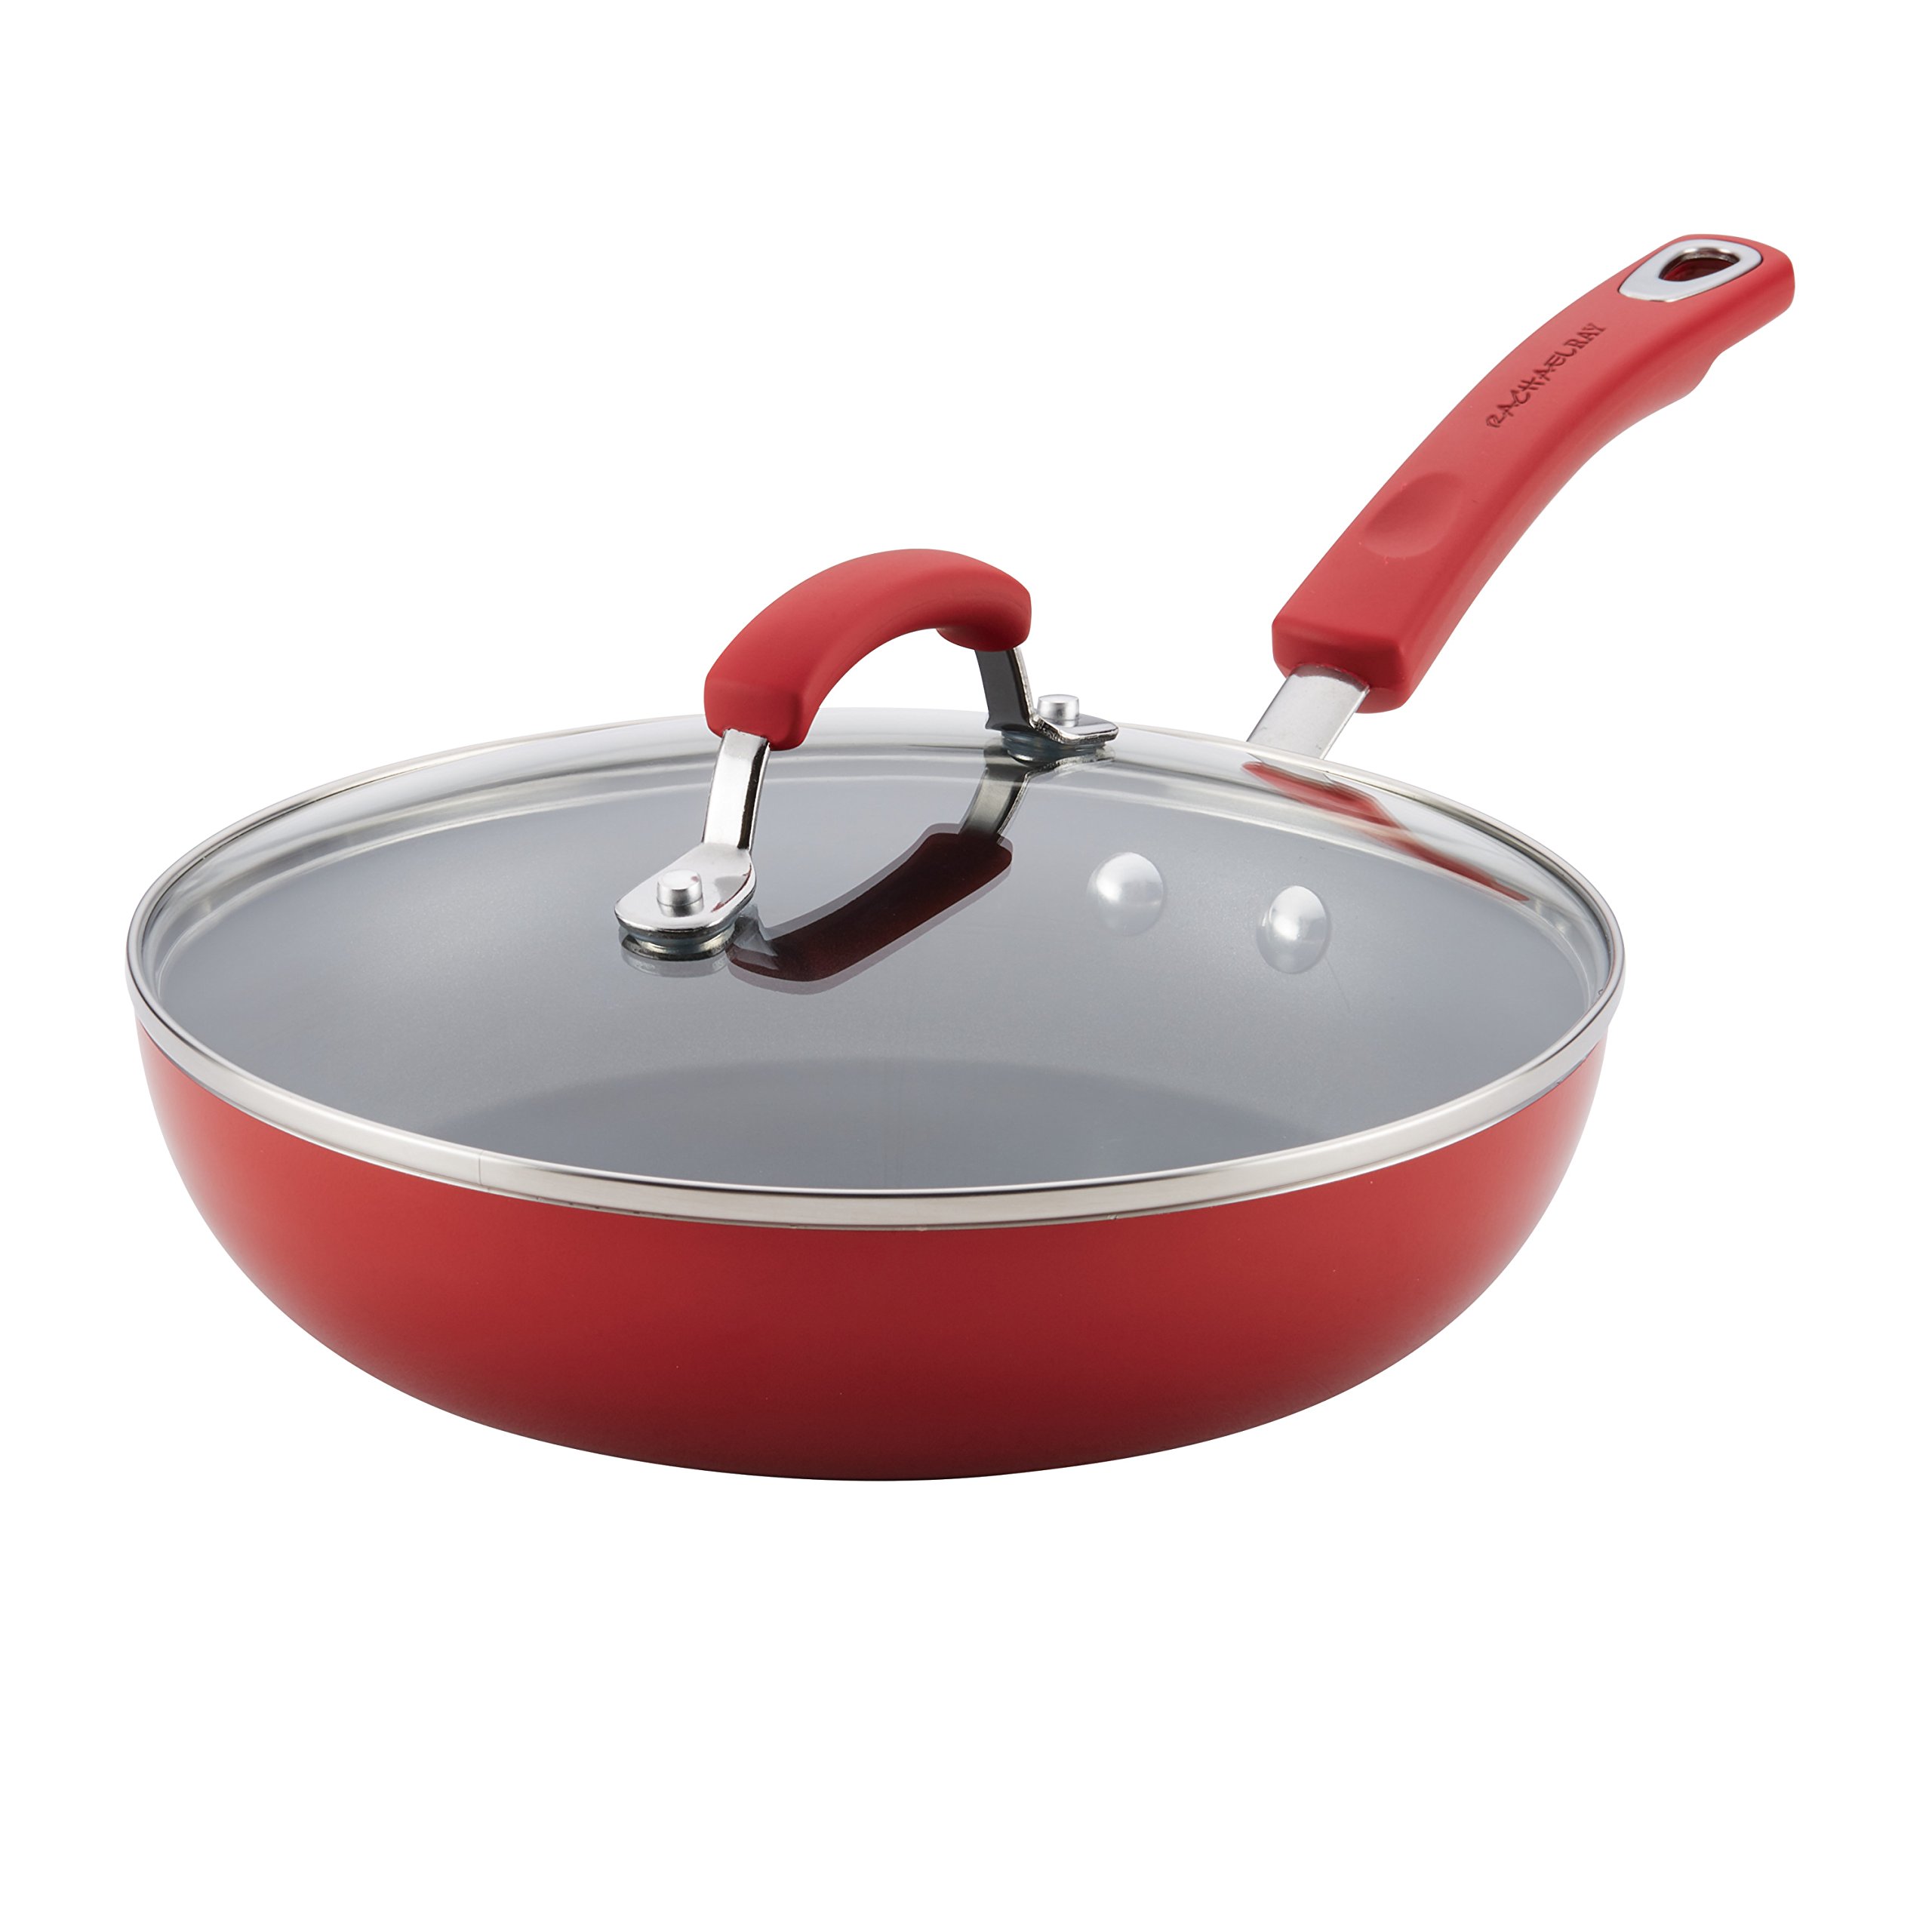 9.5" Rachael Ray Deep Nonstick Frying Pan / Fry Skillet (Red) $11.24 + Free Shipping w/ Prime or on $25+